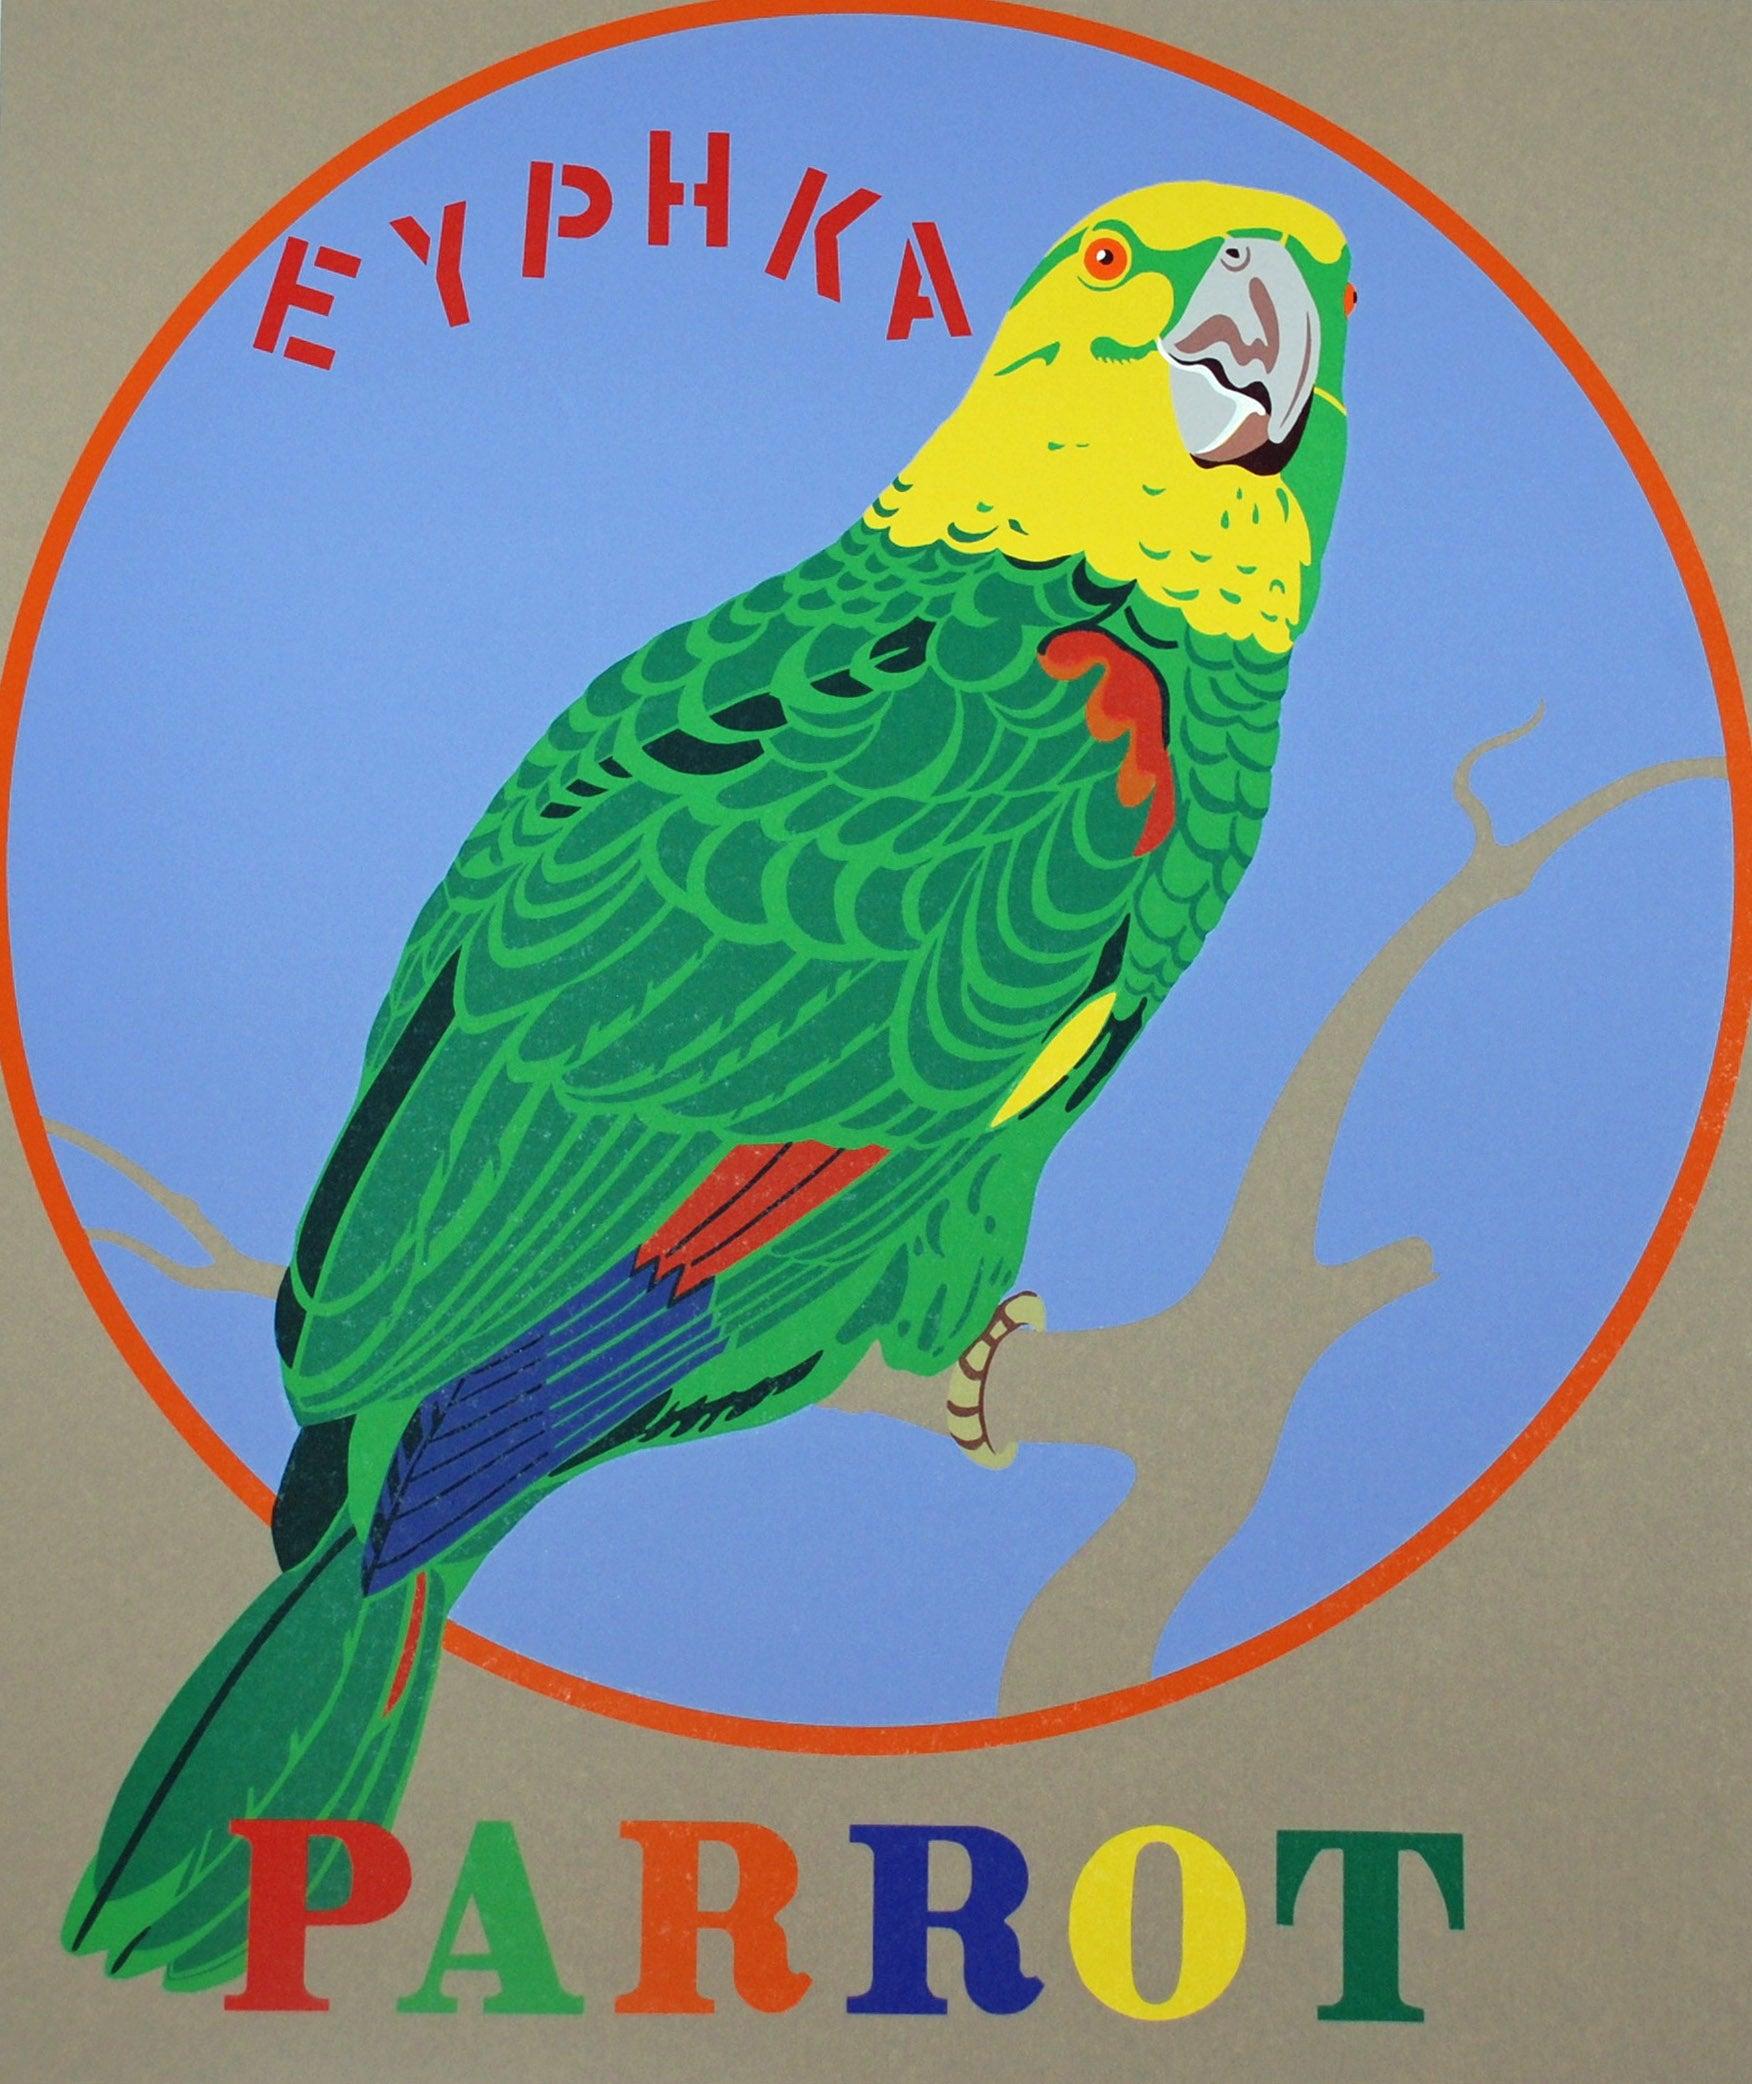 Artist: Robert Indiana
Title: Parrot
Portfolio: 1997 The American Dream
Medium: Original serigraph
Year: 1997
Edition: 76/395
Frame Size: 25 1/4" x 23"
Sheet Size: 22" x 16"
Image Size: 16 1/2" x 14"
Signed: Unsigned